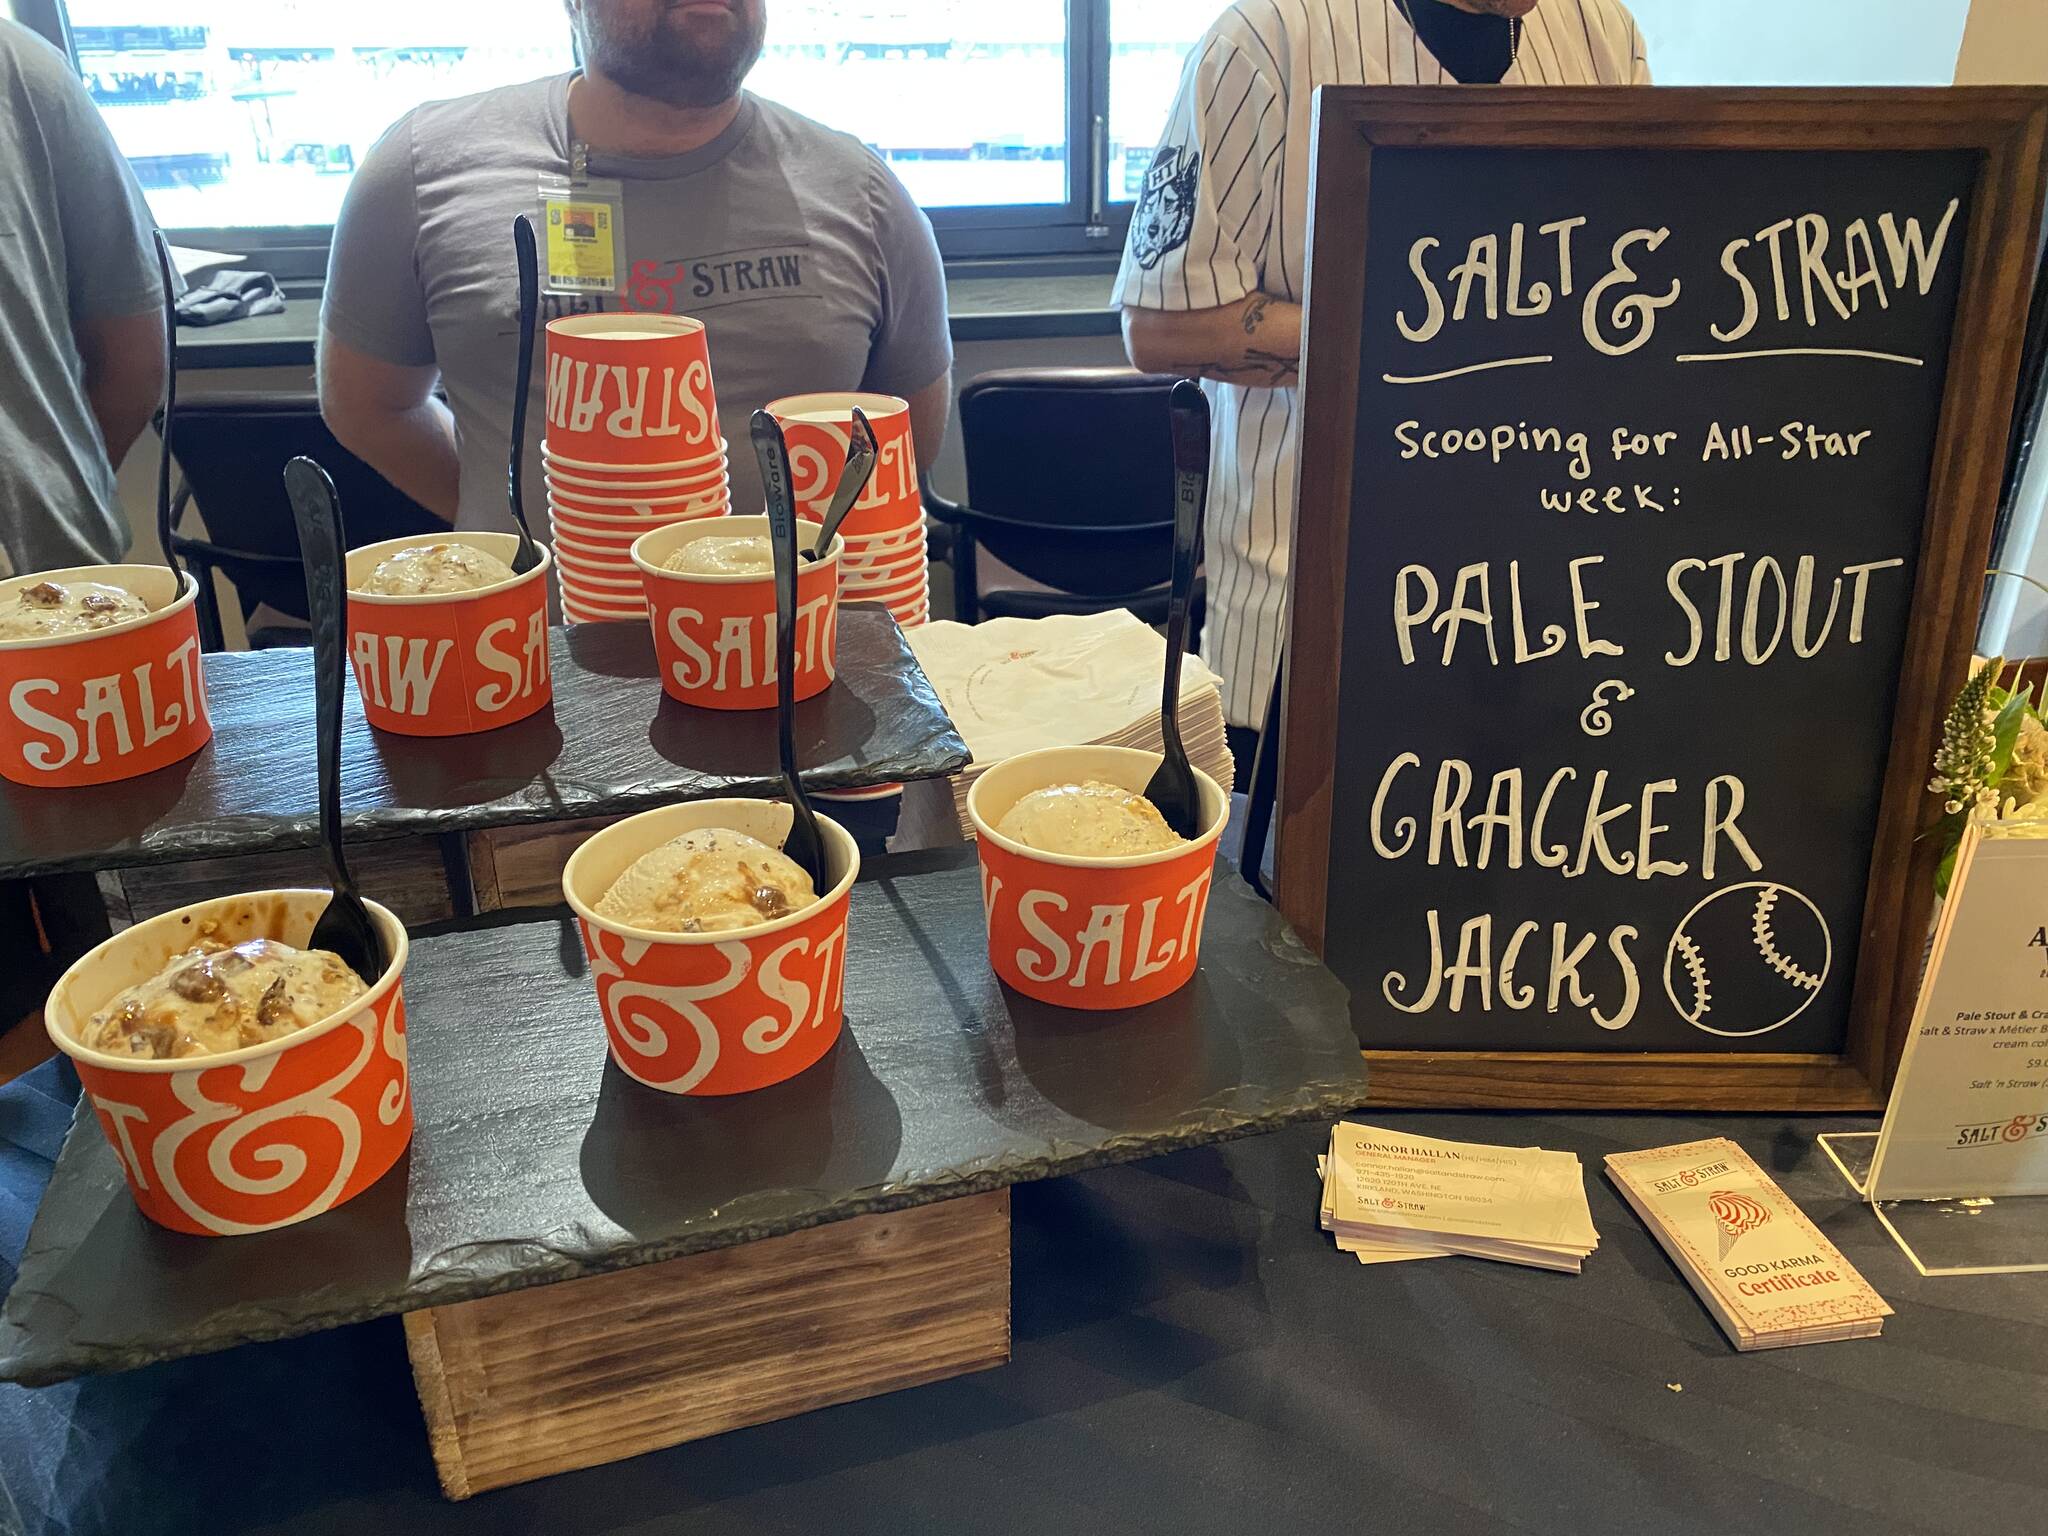 Salt & Straw’s Pale Stout and Cracker Jack Ice Cream is a limited-edition flavor for All-Star Week. Olivia Sullivan / The Mirror